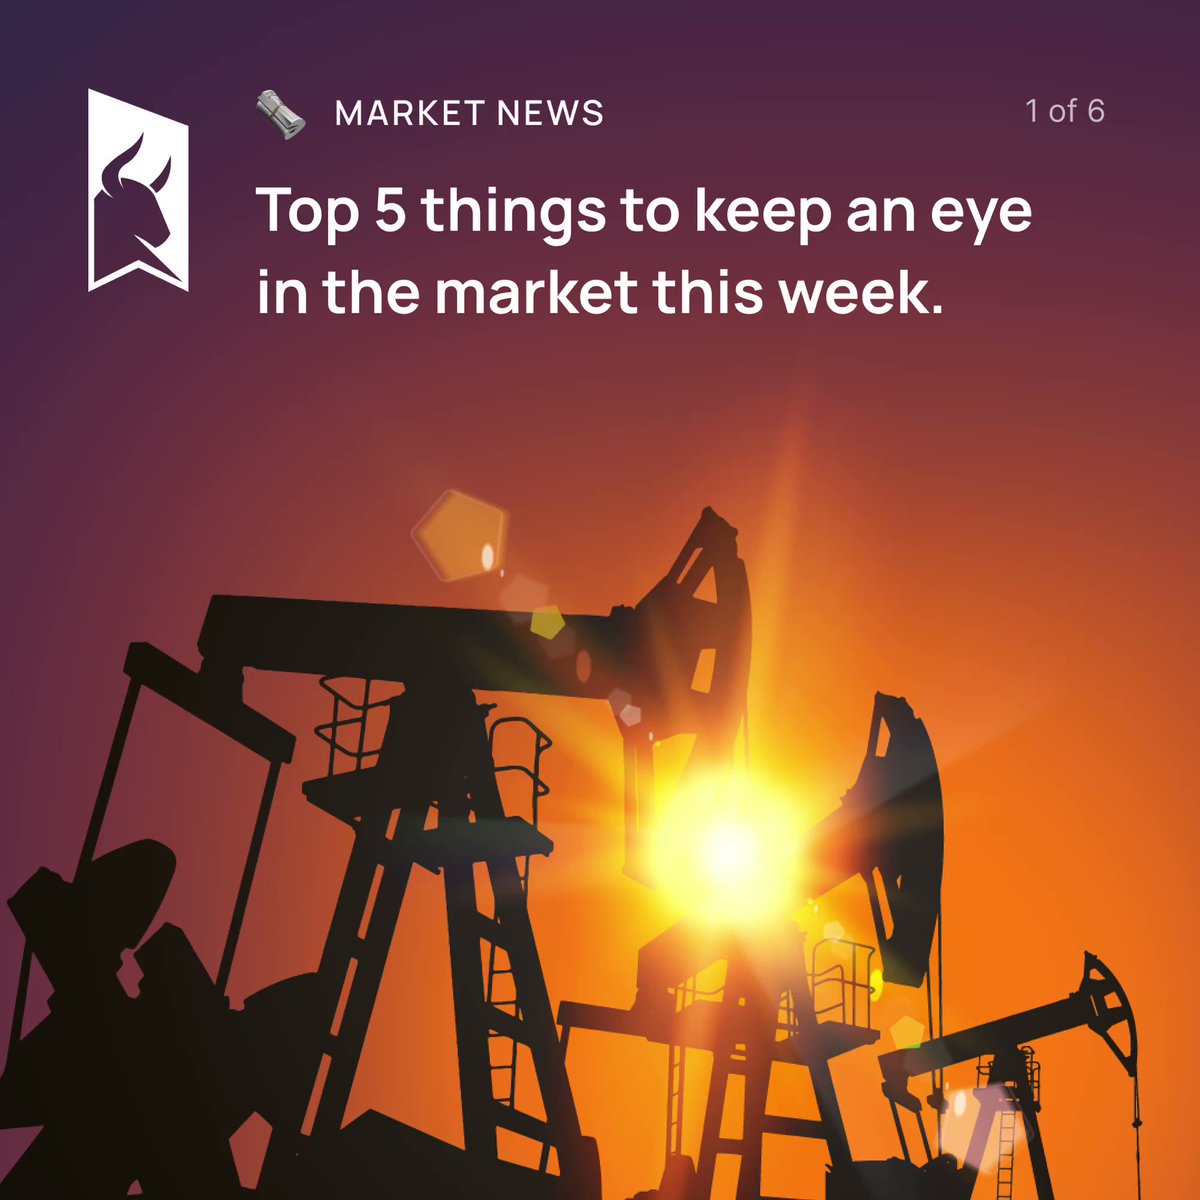 Market News: Top 5 things to keep an eye in the market this week.

1. Earnings time: Second-quarter earnings season gets underway in earnest in the coming week, with Tesla (NASDAQ:TSLA) the first of the massive growth and technology names that have dominated the U.S. stock market… https://t.co/75QjM8ubeV https://t.co/ZPgmBqvini